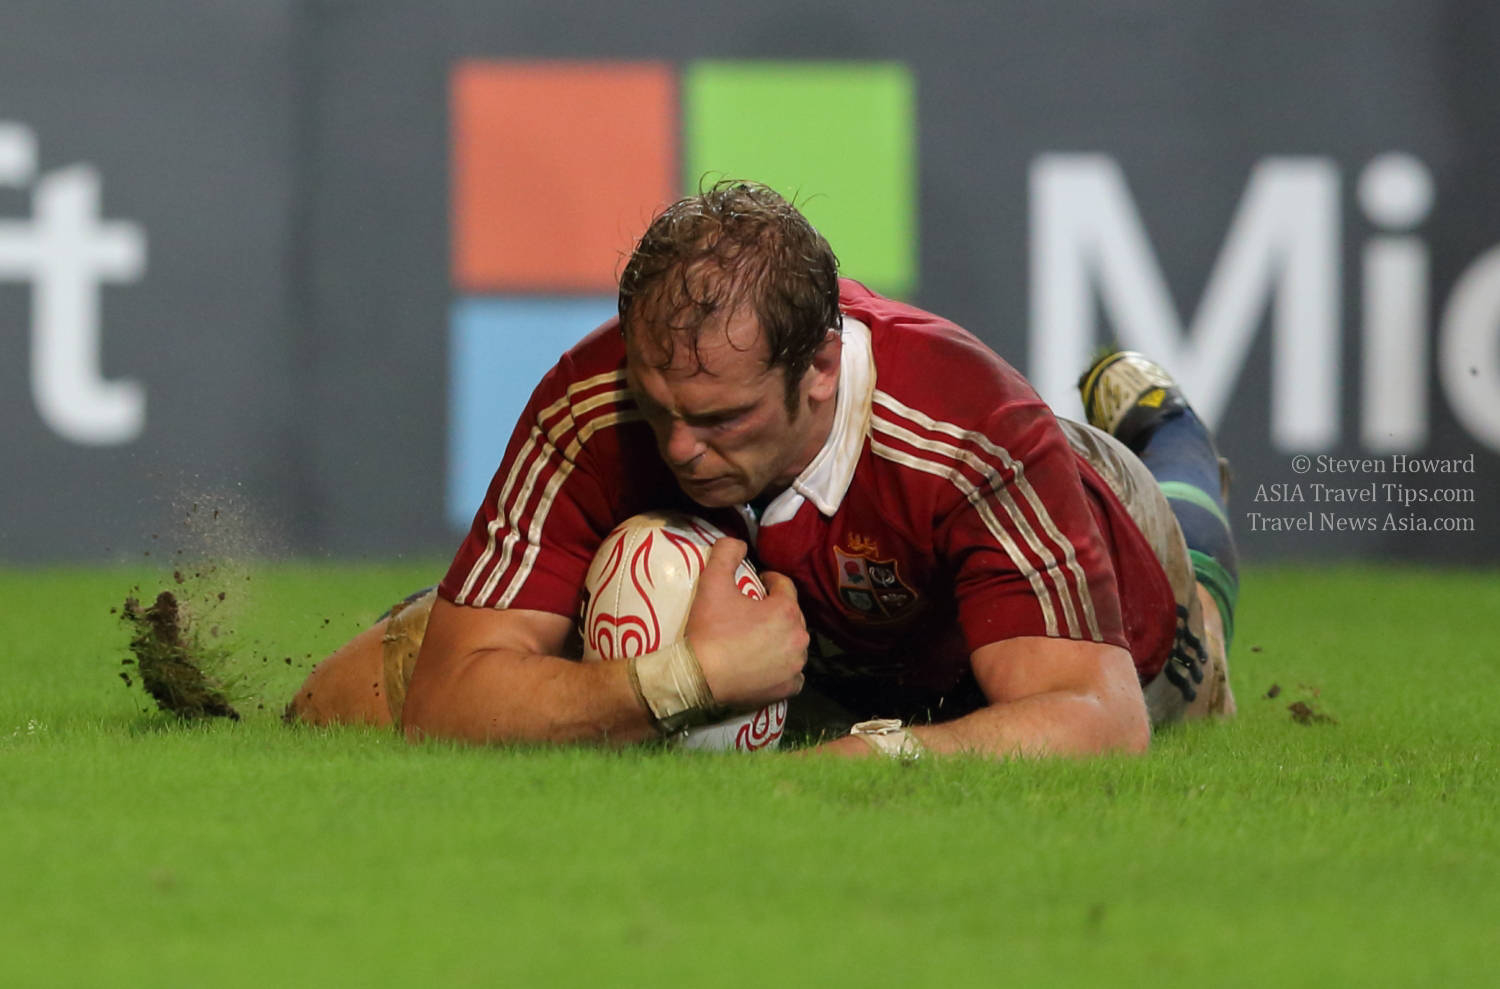 Alun Wyn Jones, a legend and one of the world's greatest players, scoring a try for the British & Irish Lions against The Barbarians in Hong Kong in 2013. Picture by Steven Howard of TravelNewsAsia.com Click to enlarge.